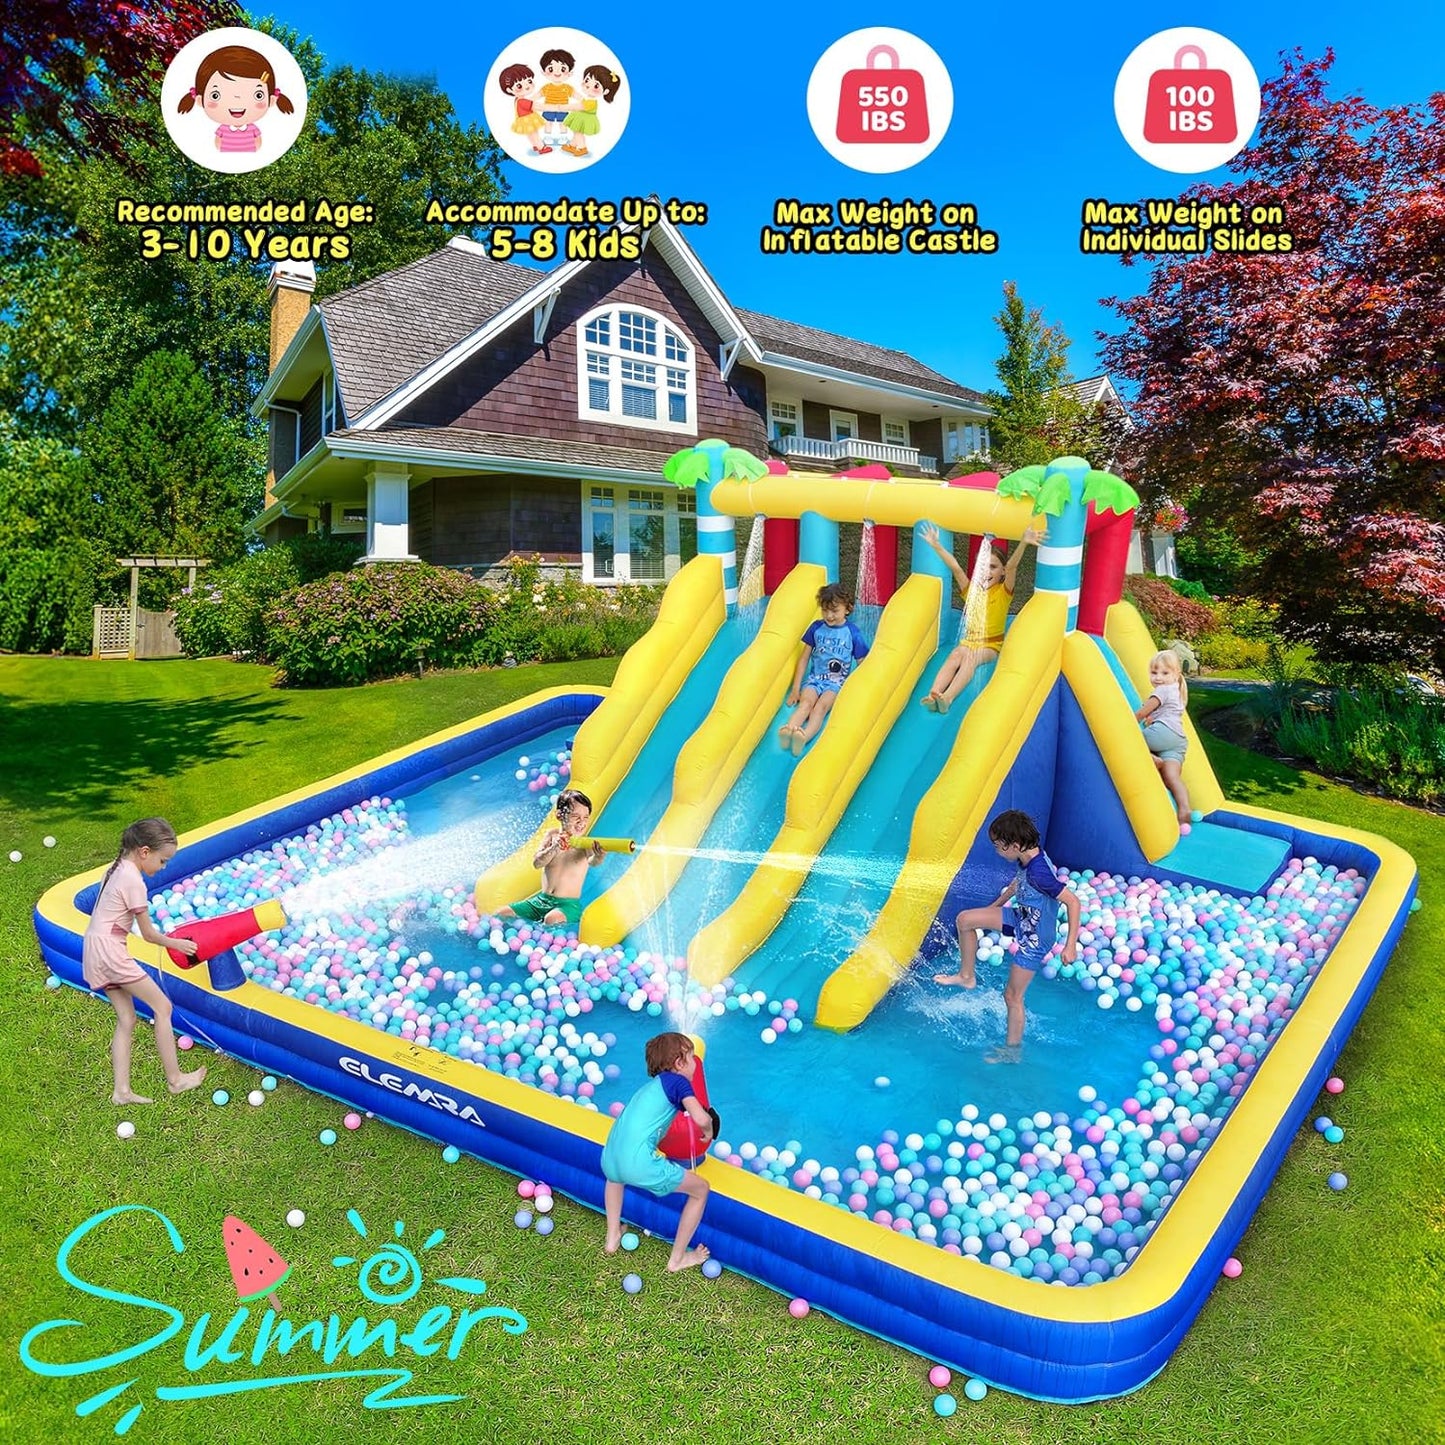 20.66X16.4Ft Inflatable Water Slide for Big Kids, Water Park for Kids Backyard with Large Double-Layer Pool,3 Extra-Long Slides,Climbing Wall, 2 Water Cannons, Water Spraying, 750W Air Blower